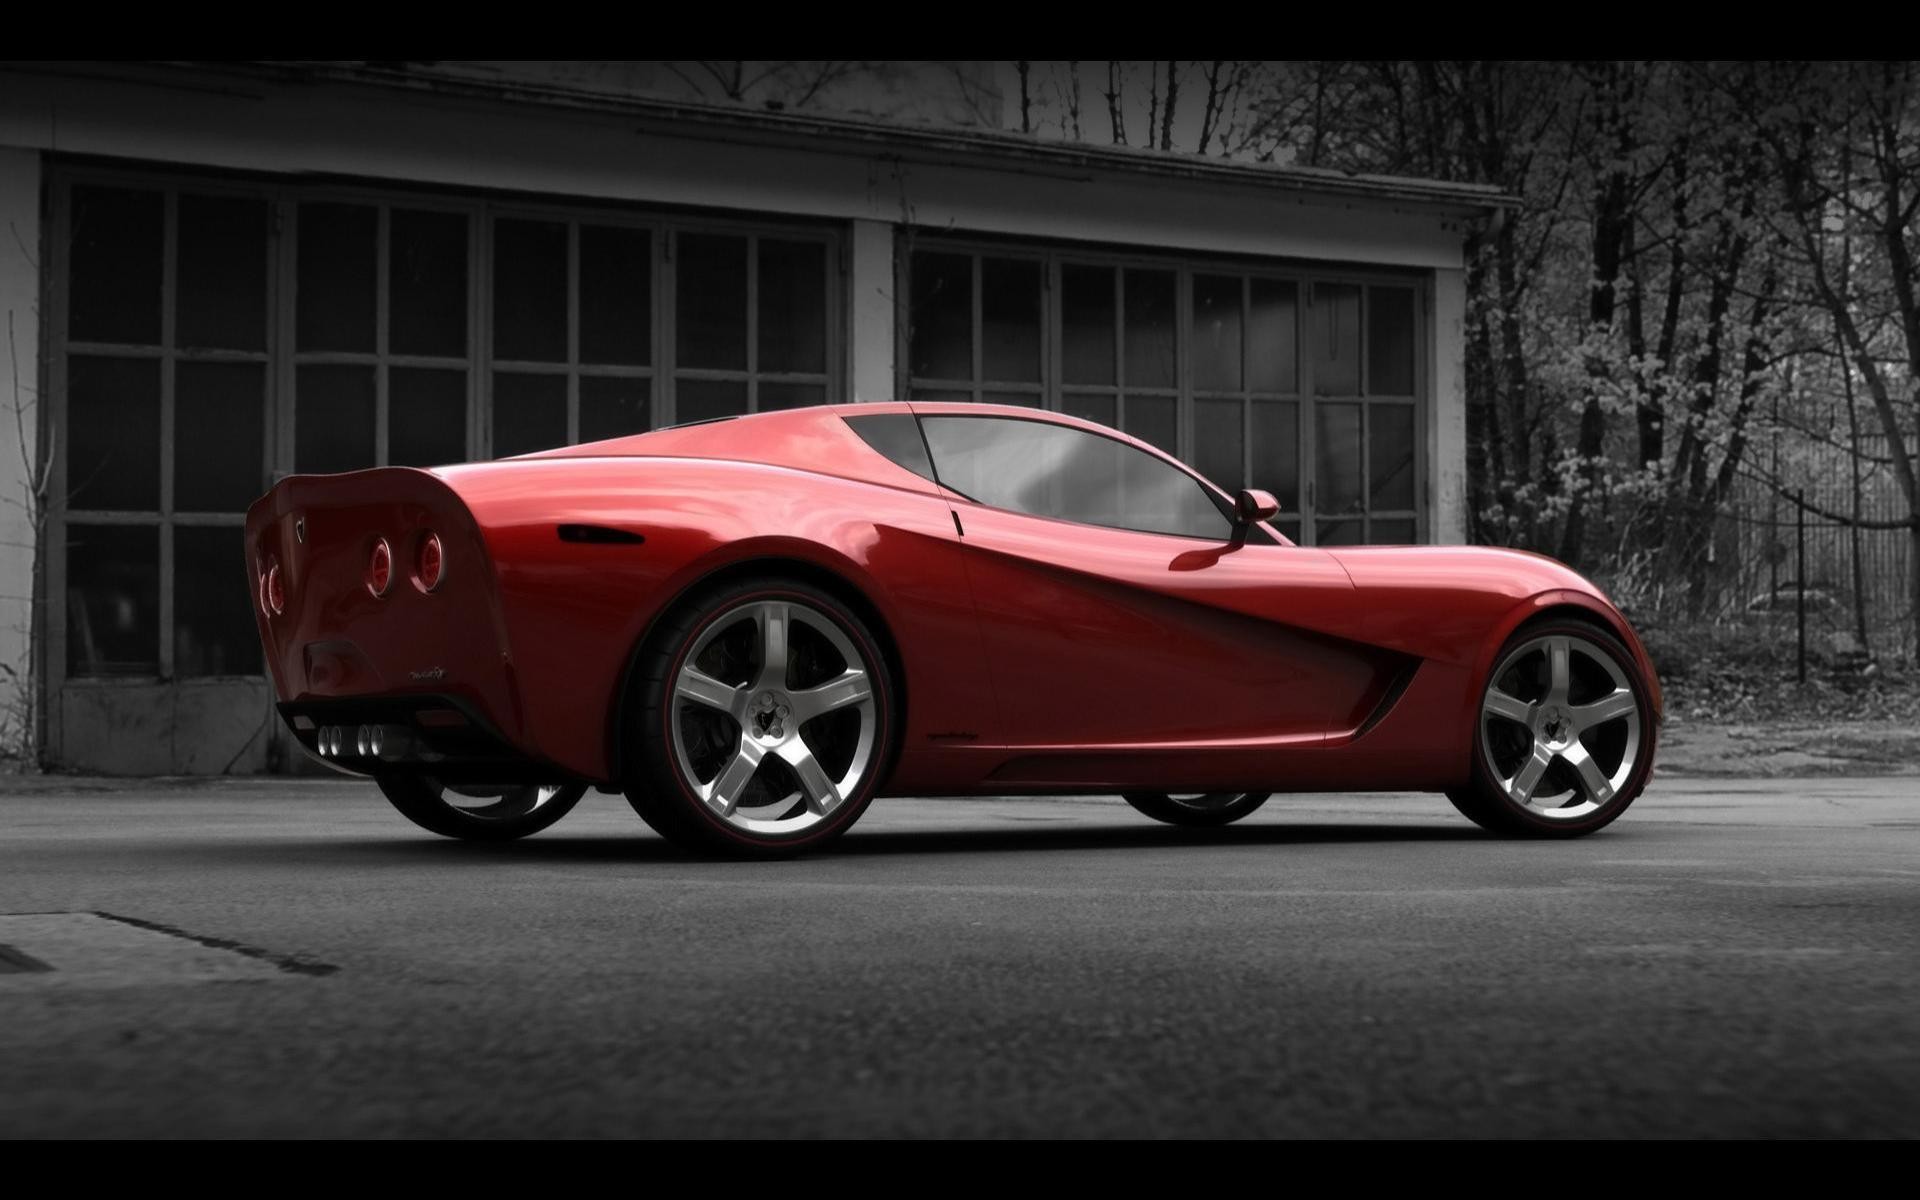 Corvette sports car in Red by Chevrolet